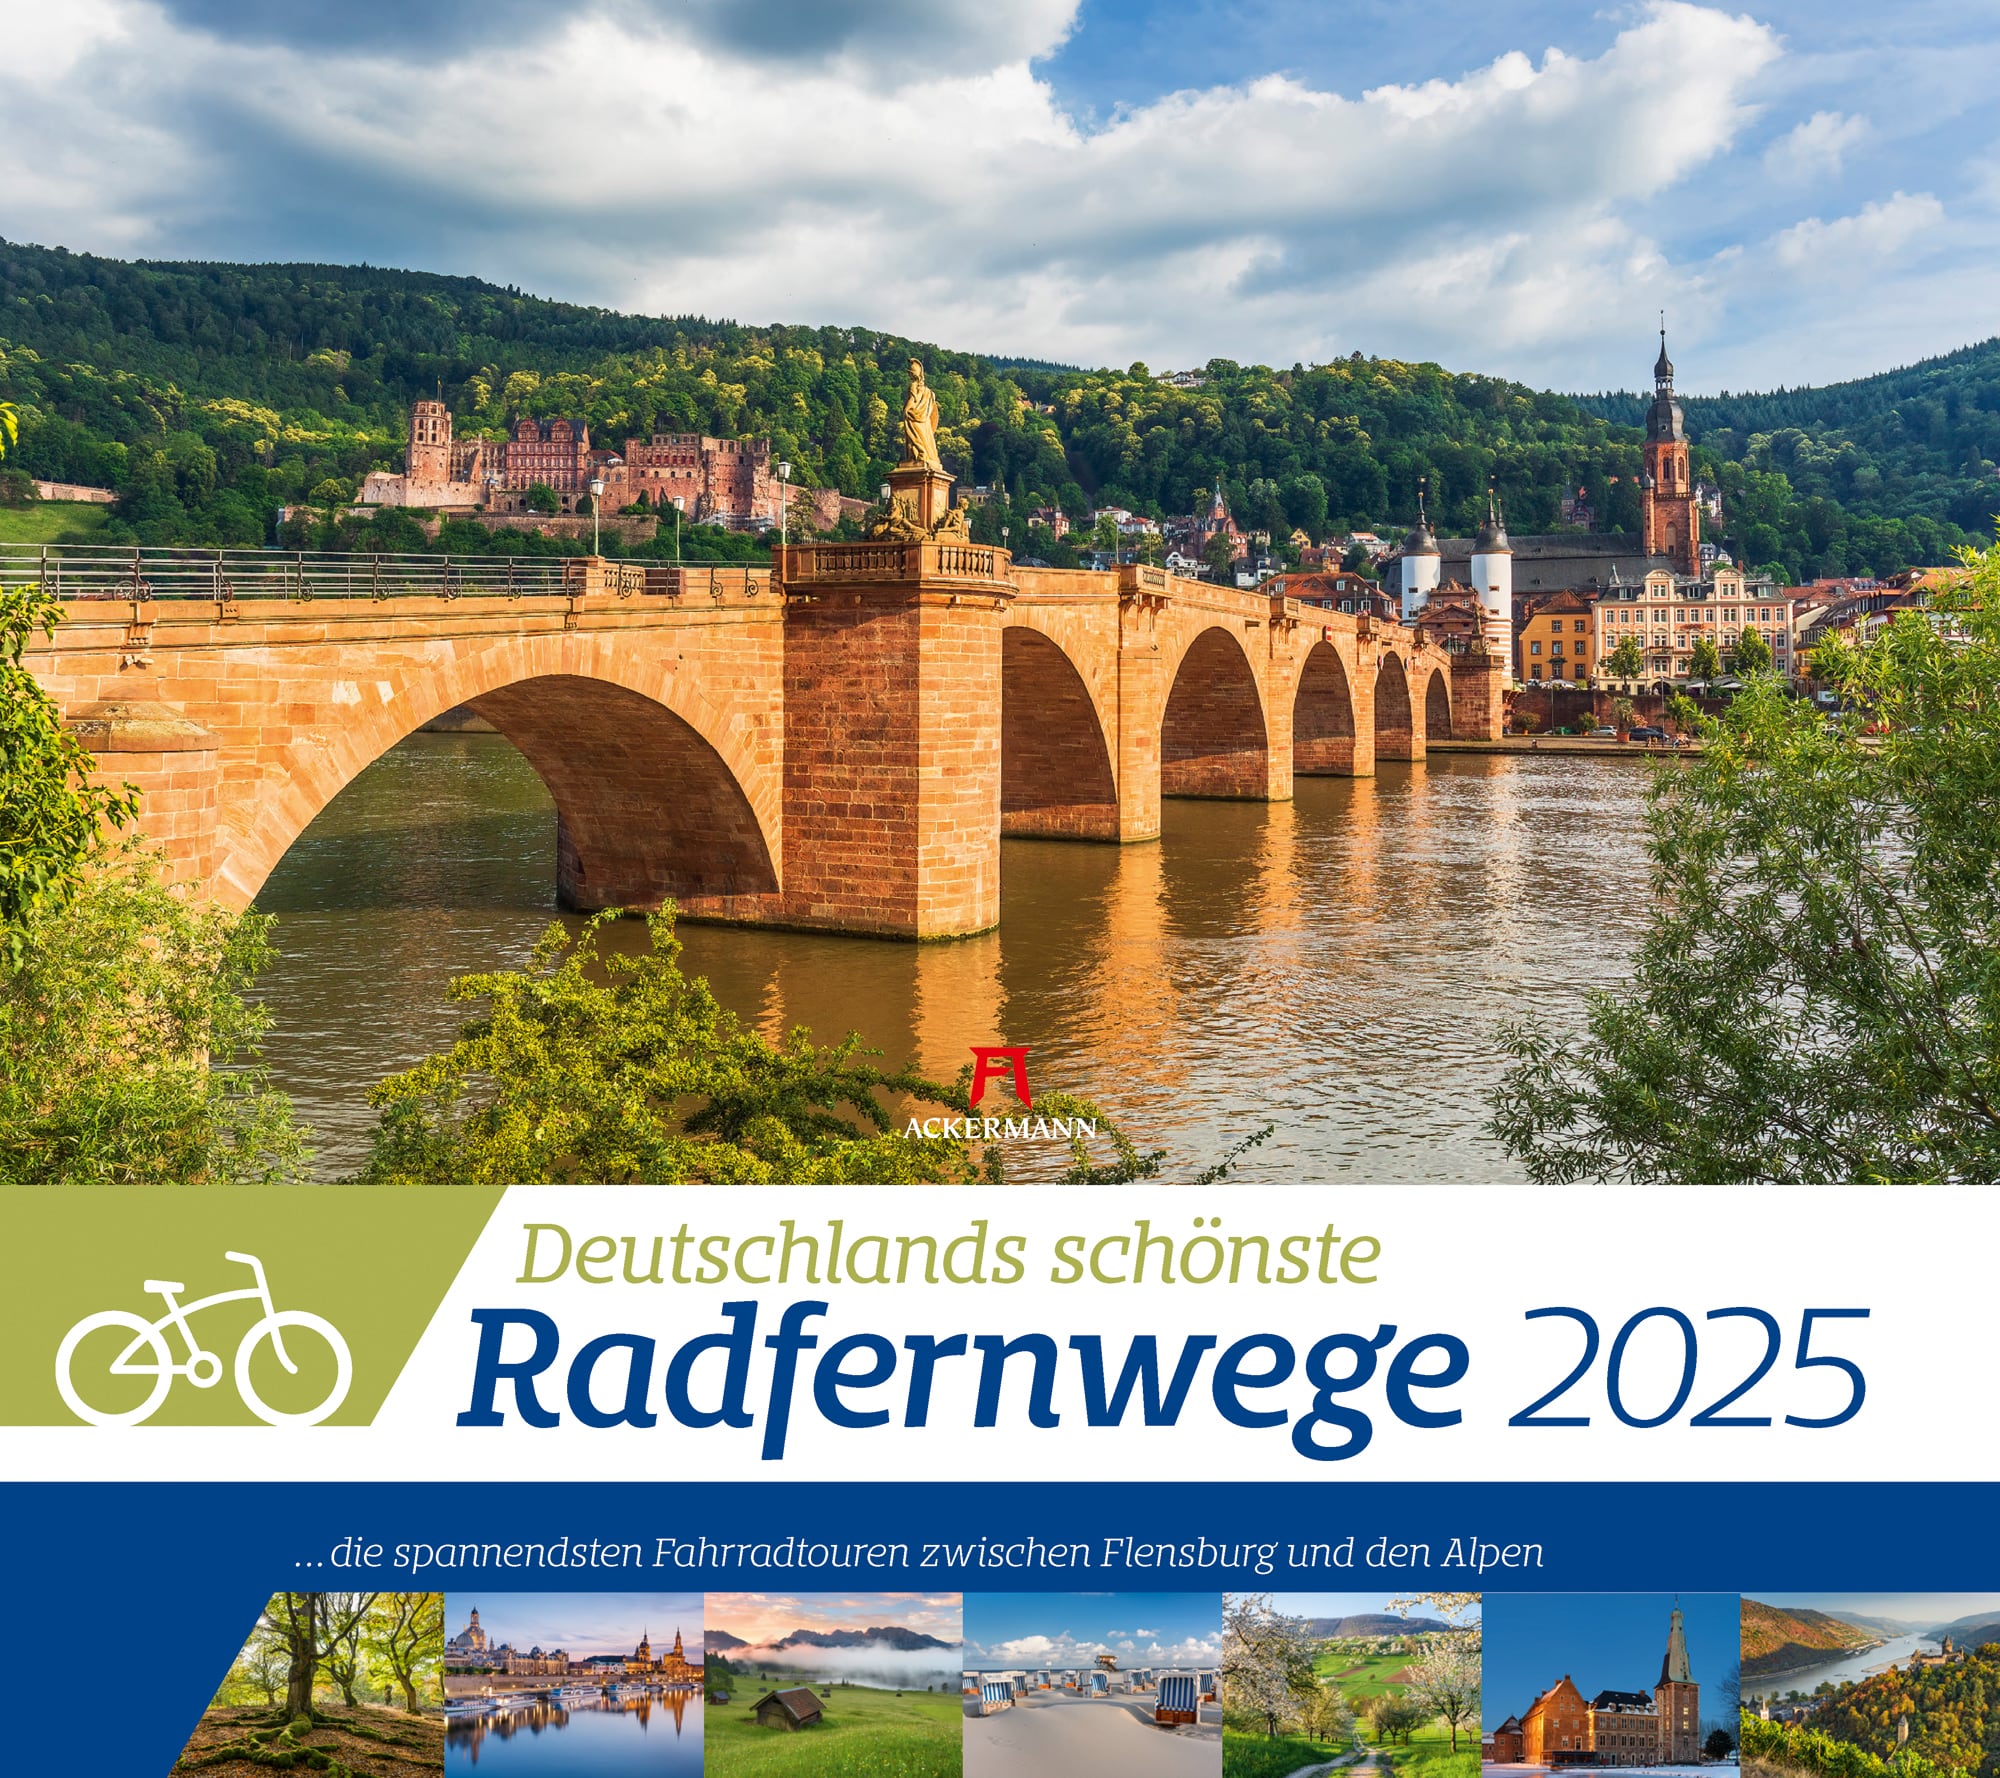 Ackermann Calendar Cycle Routes of Germany 2025 - Cover Page